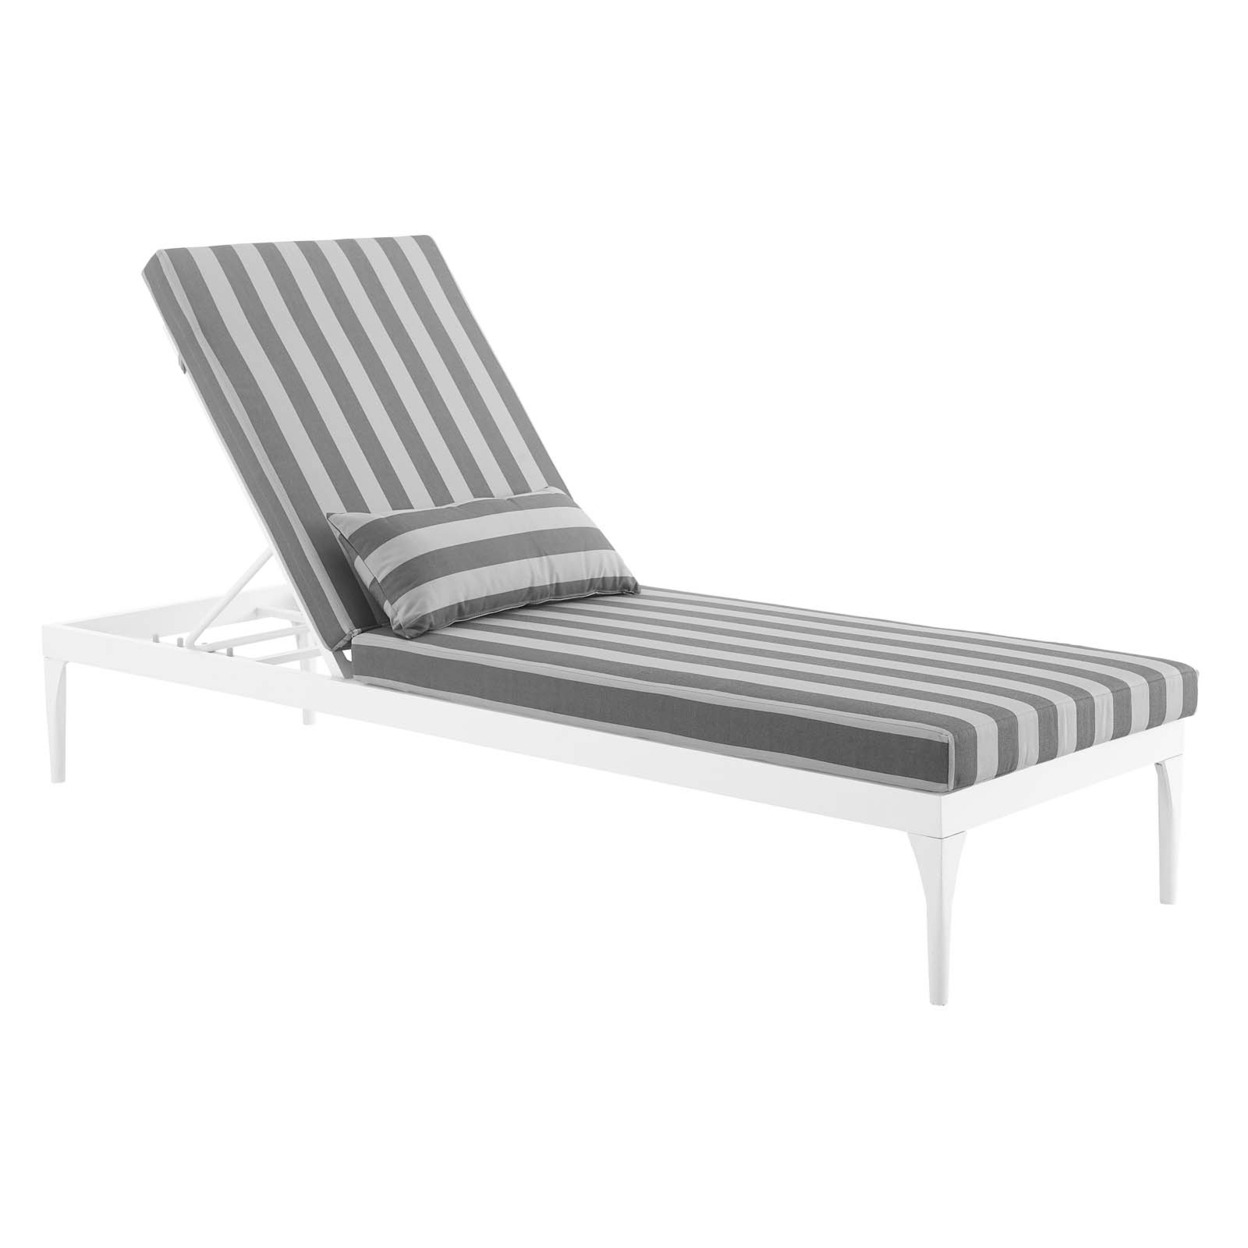 Perspective Cushion Outdoor Patio Chaise Lounge Chair,White Striped Gray